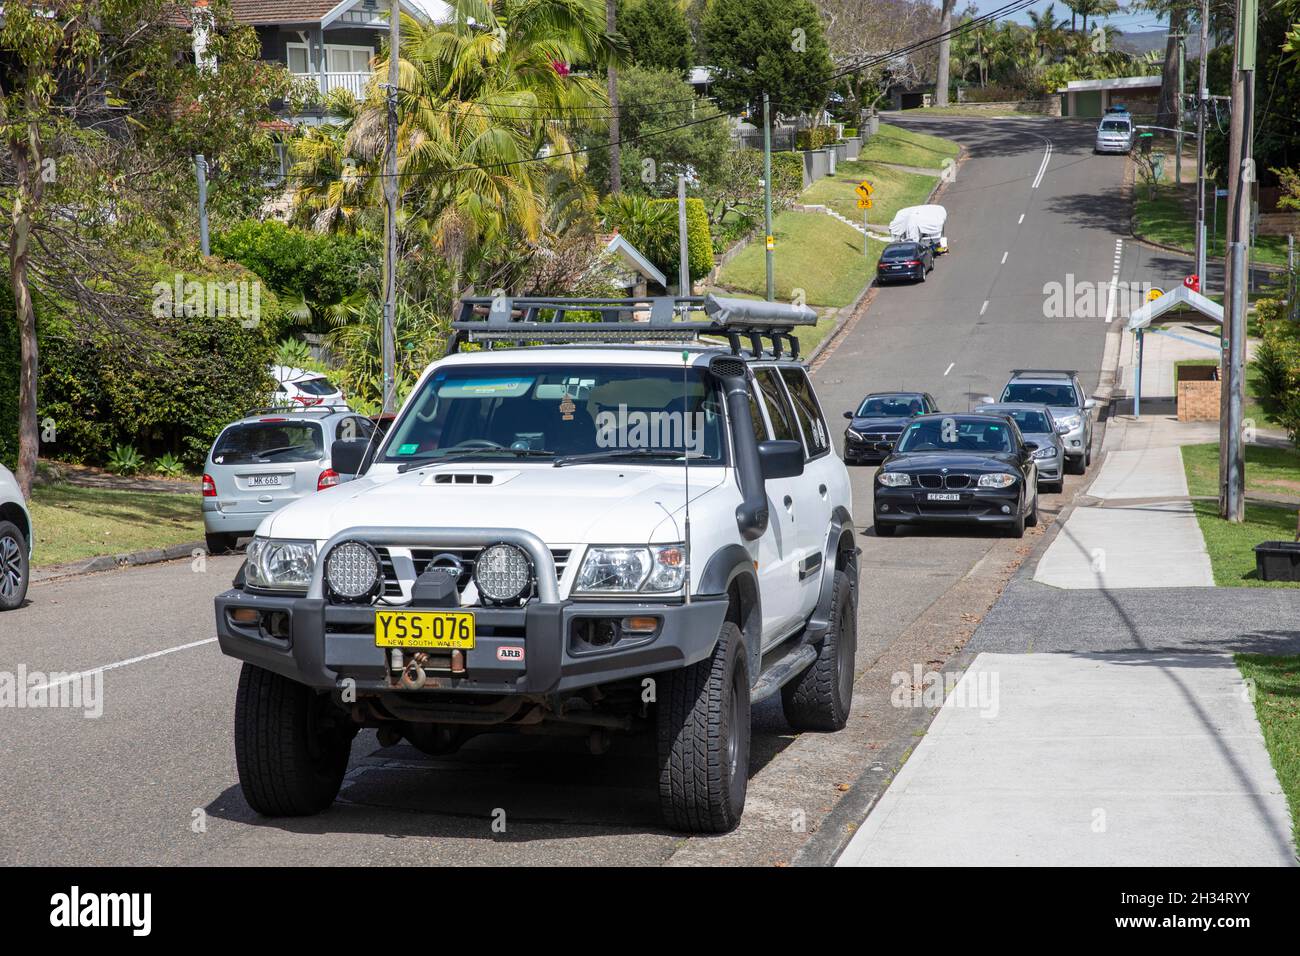 White Nissan Patrol vehicle in Sydney set up for off road driving,Sydney,Australia Stock Photo